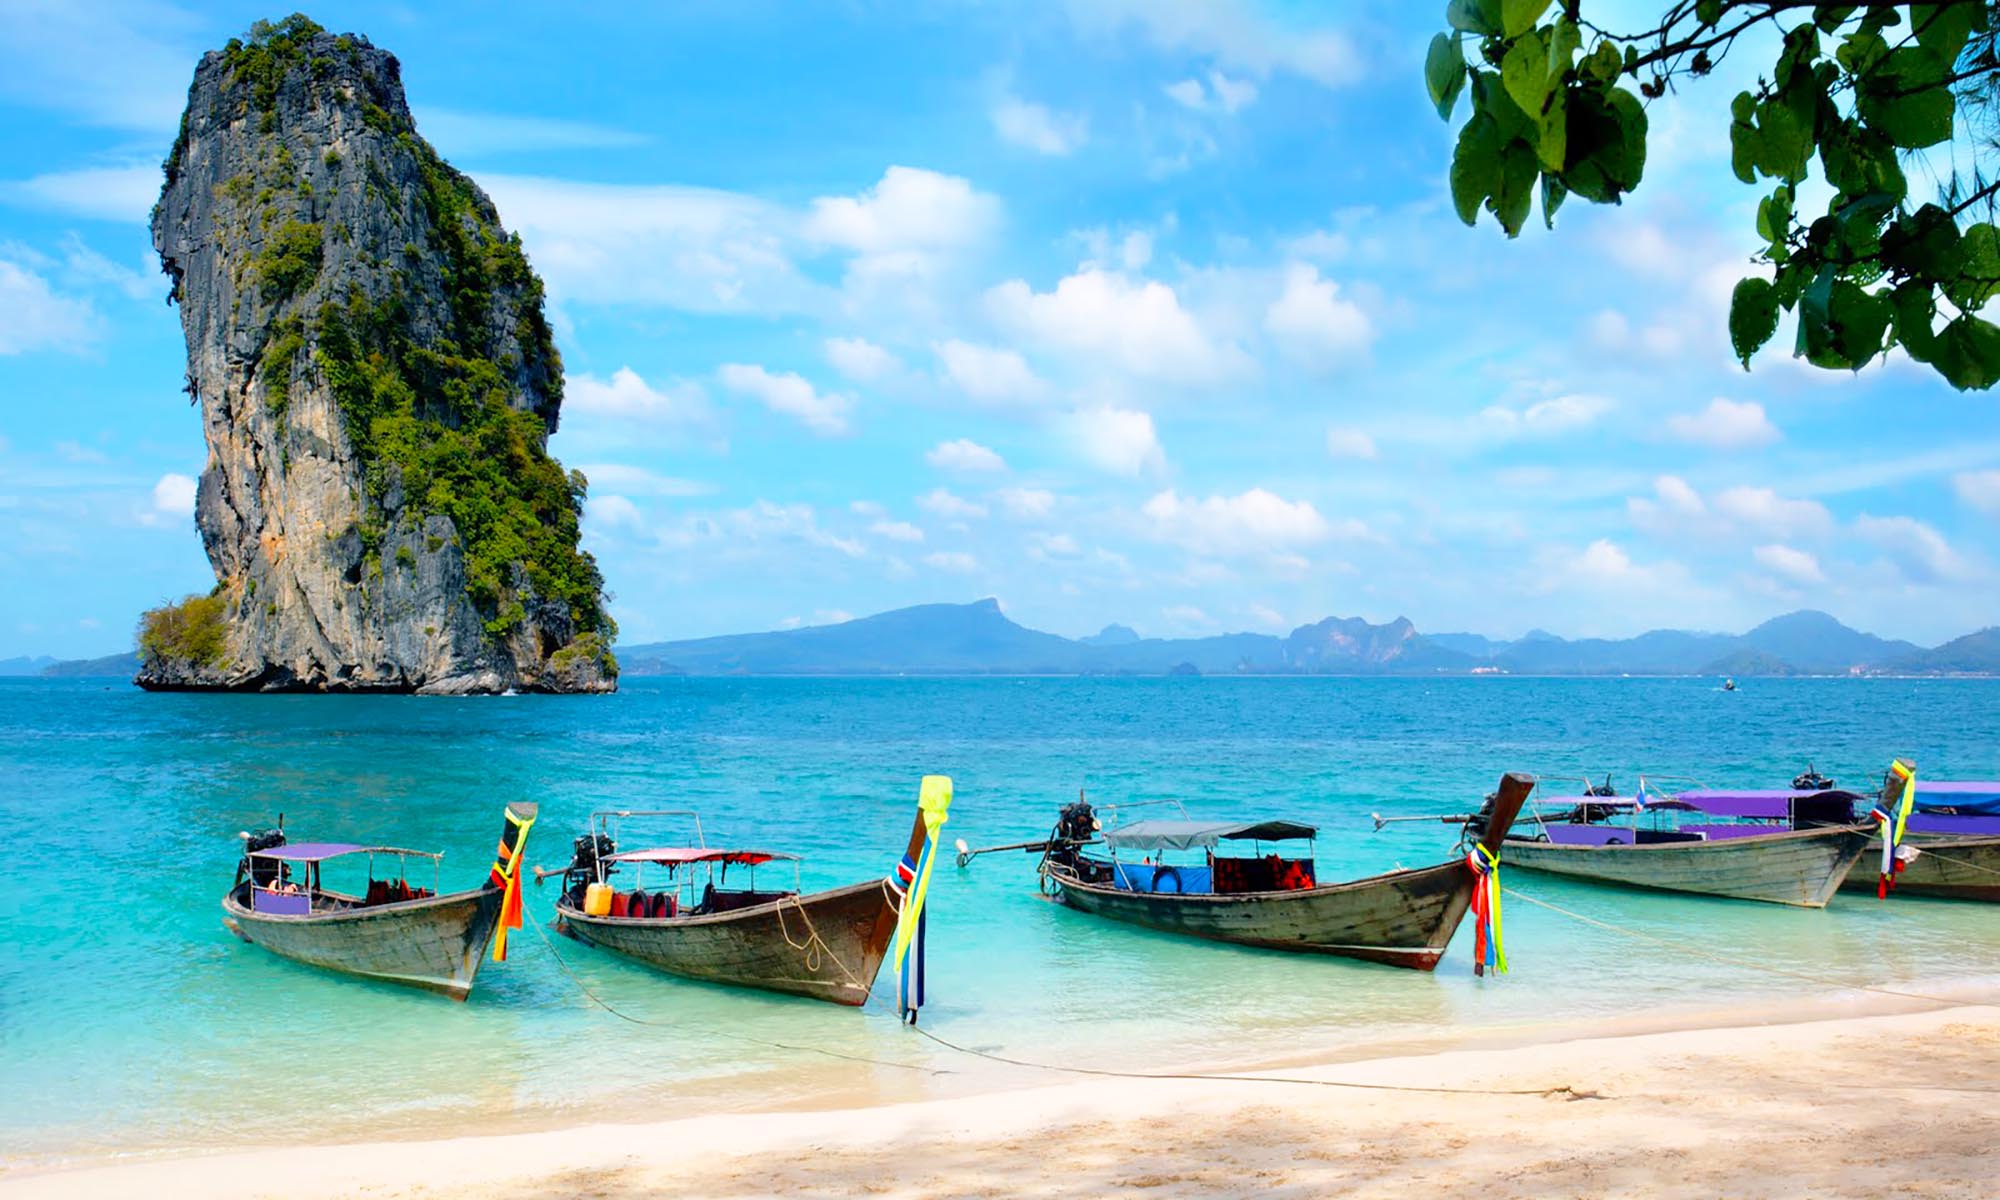 trips to thailand packages